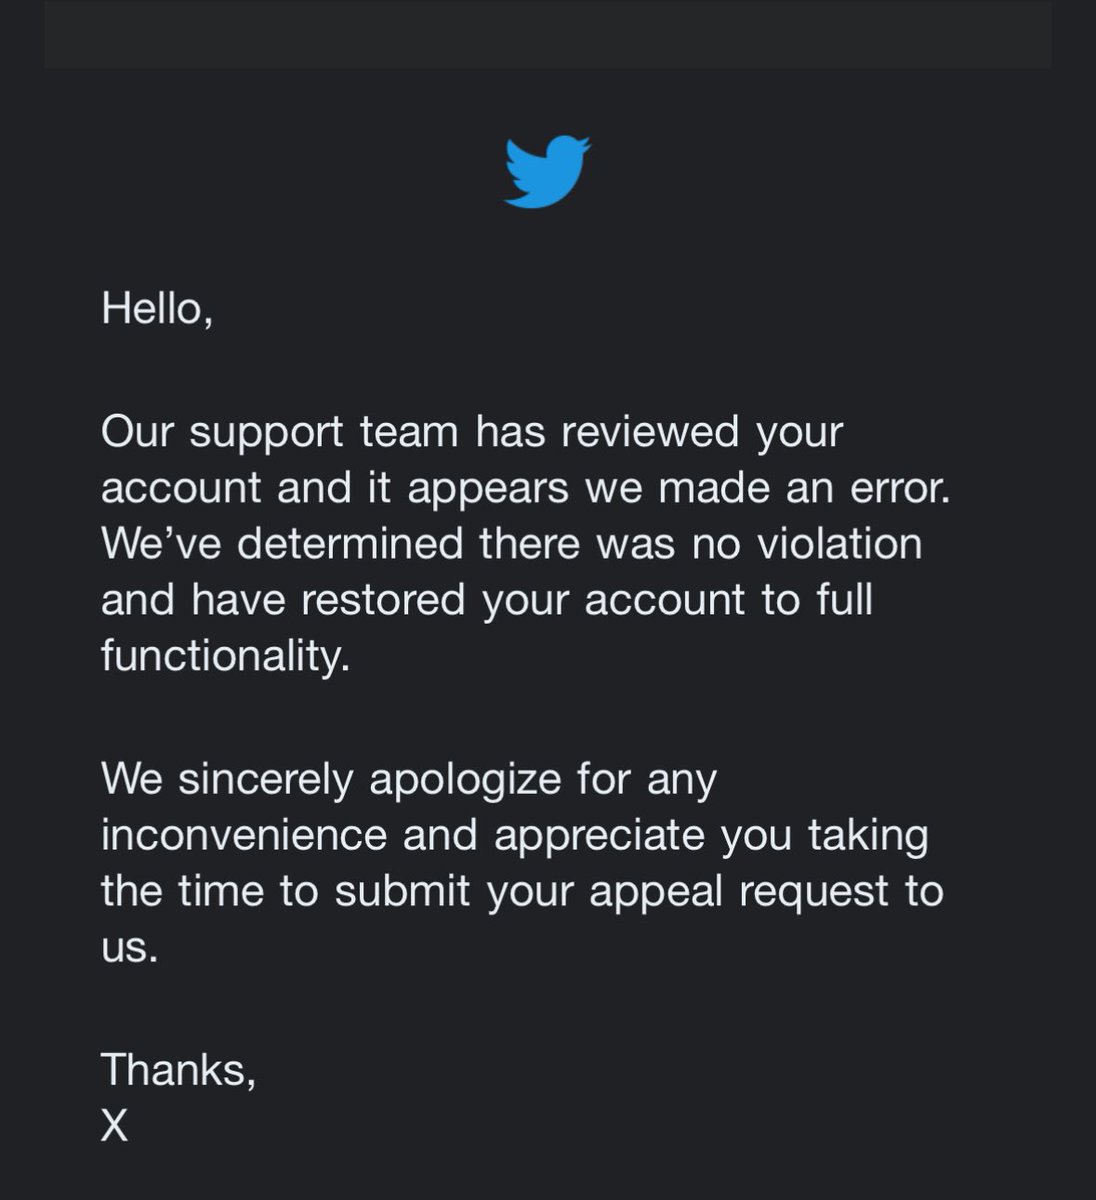 After 4 months? The guys at X really need to fix their algorithm. A bot that mindlessly suspends accounts based on a single word out of context hardly passes as a credible 'support team.'